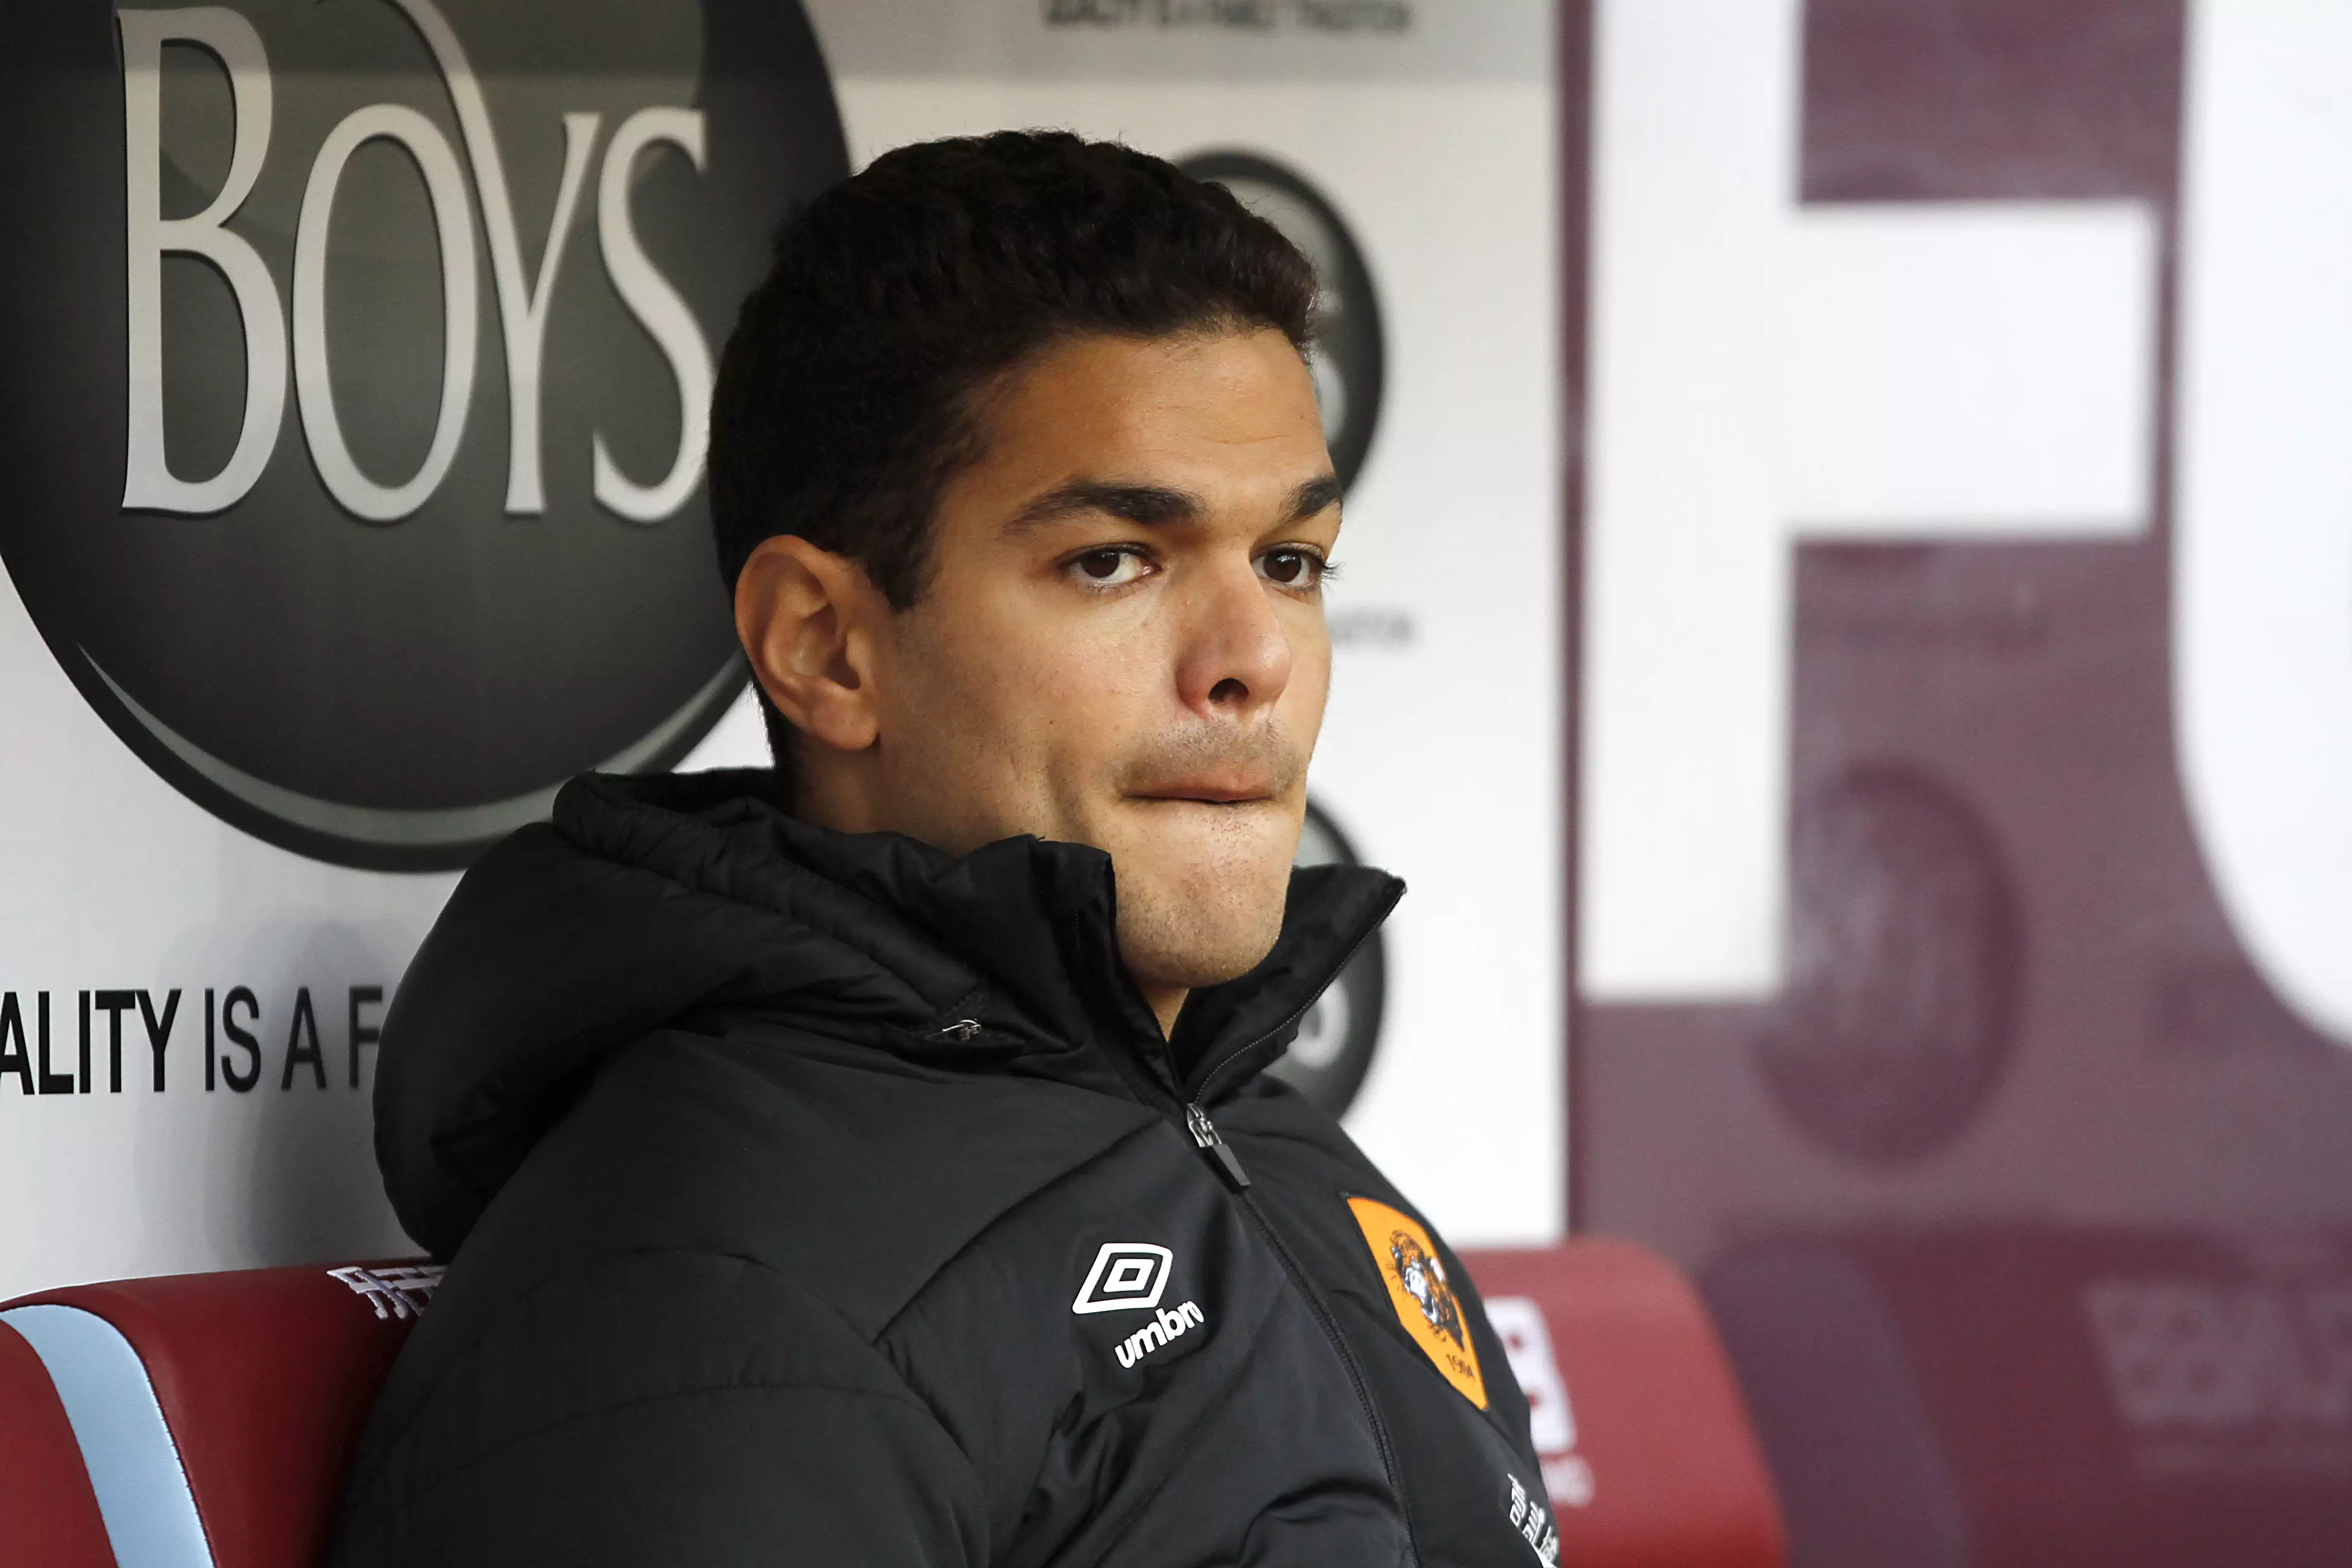 Ben Arfa's time at Hull didn't end well. Image: PA Images